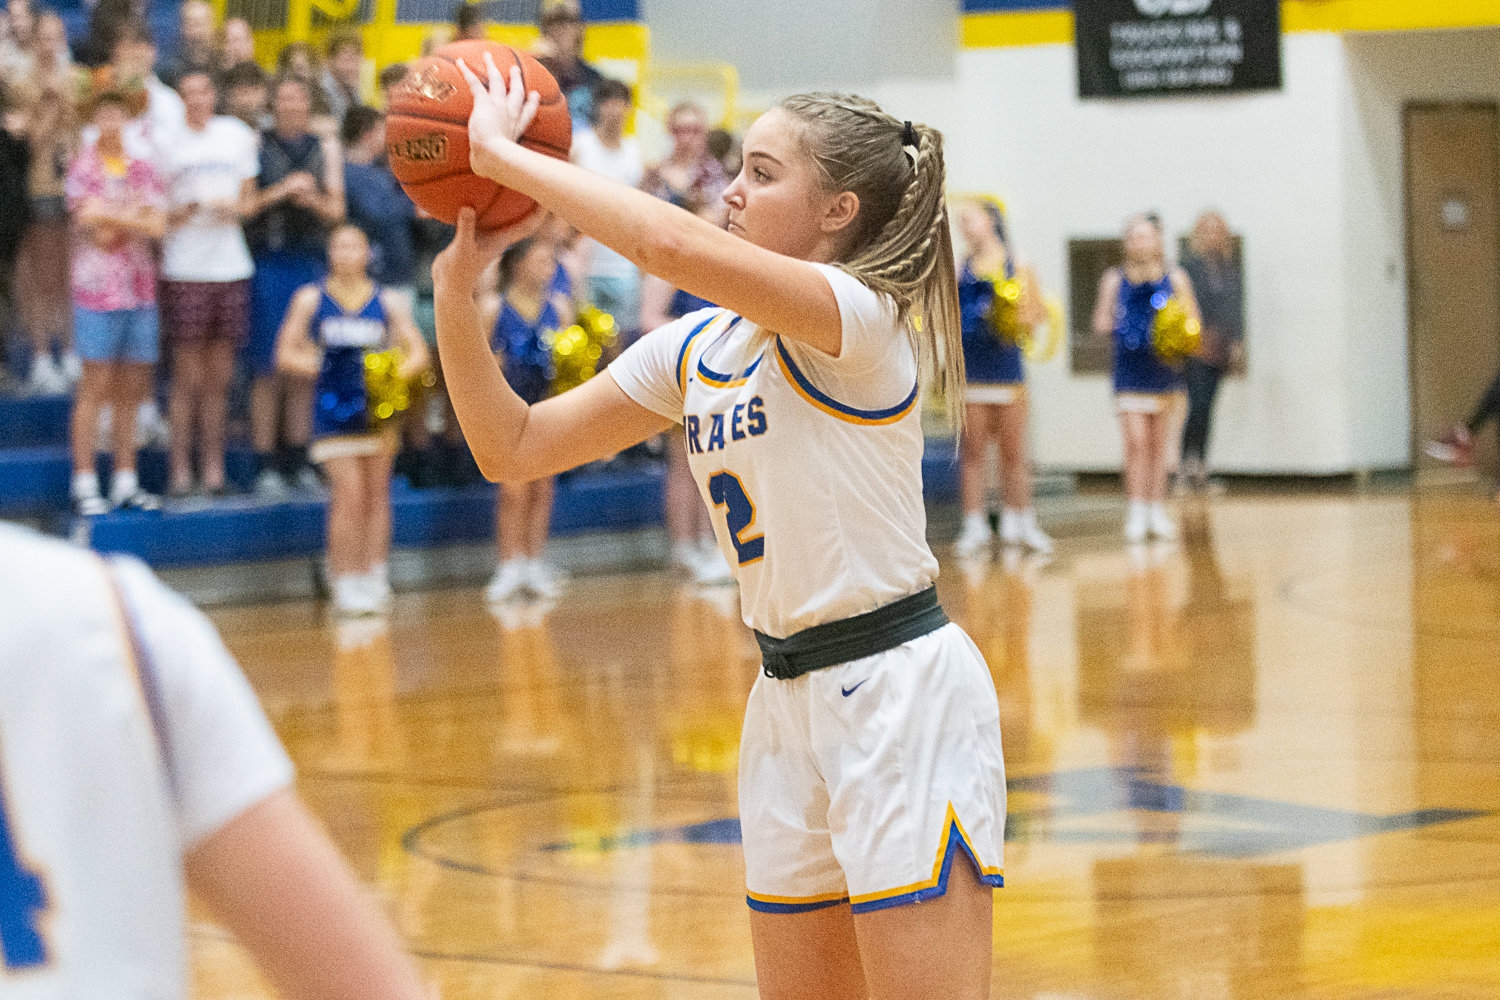 Danika Hallom pulls up from distance during the first quarter of Adna's 72-28 win over Wahkiakum on Jan. 13.